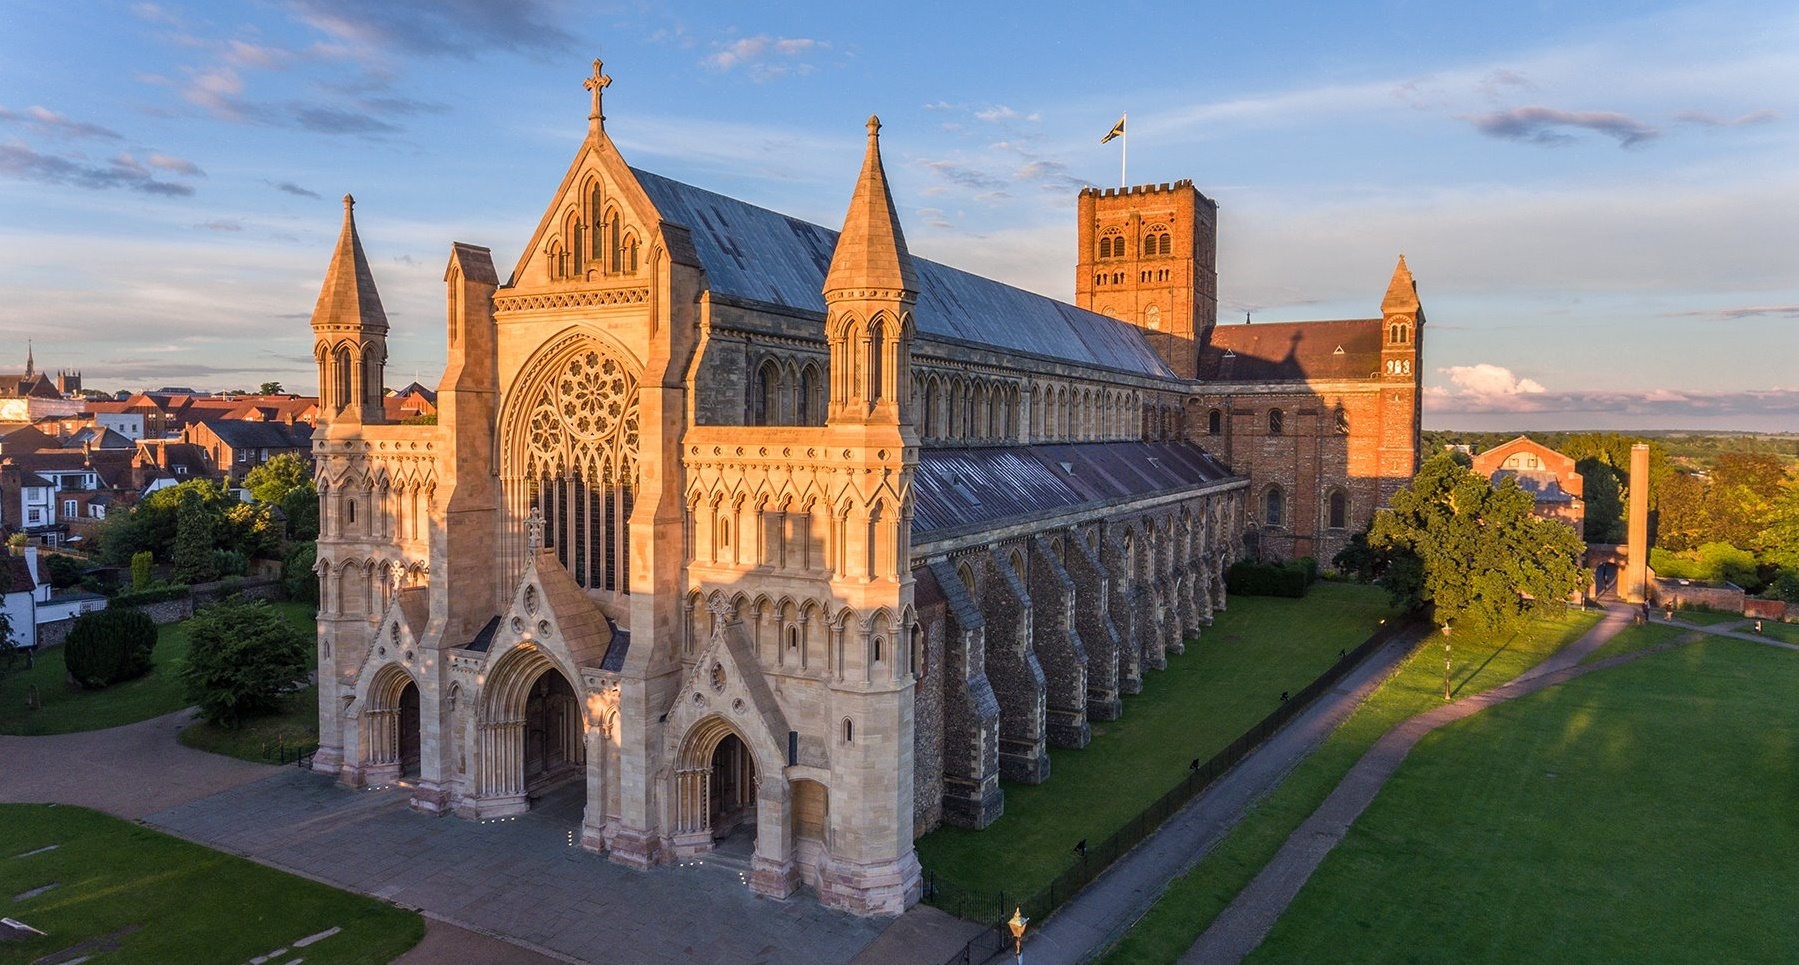 St Albans Cathedral. Photo: St Albans Cathedral